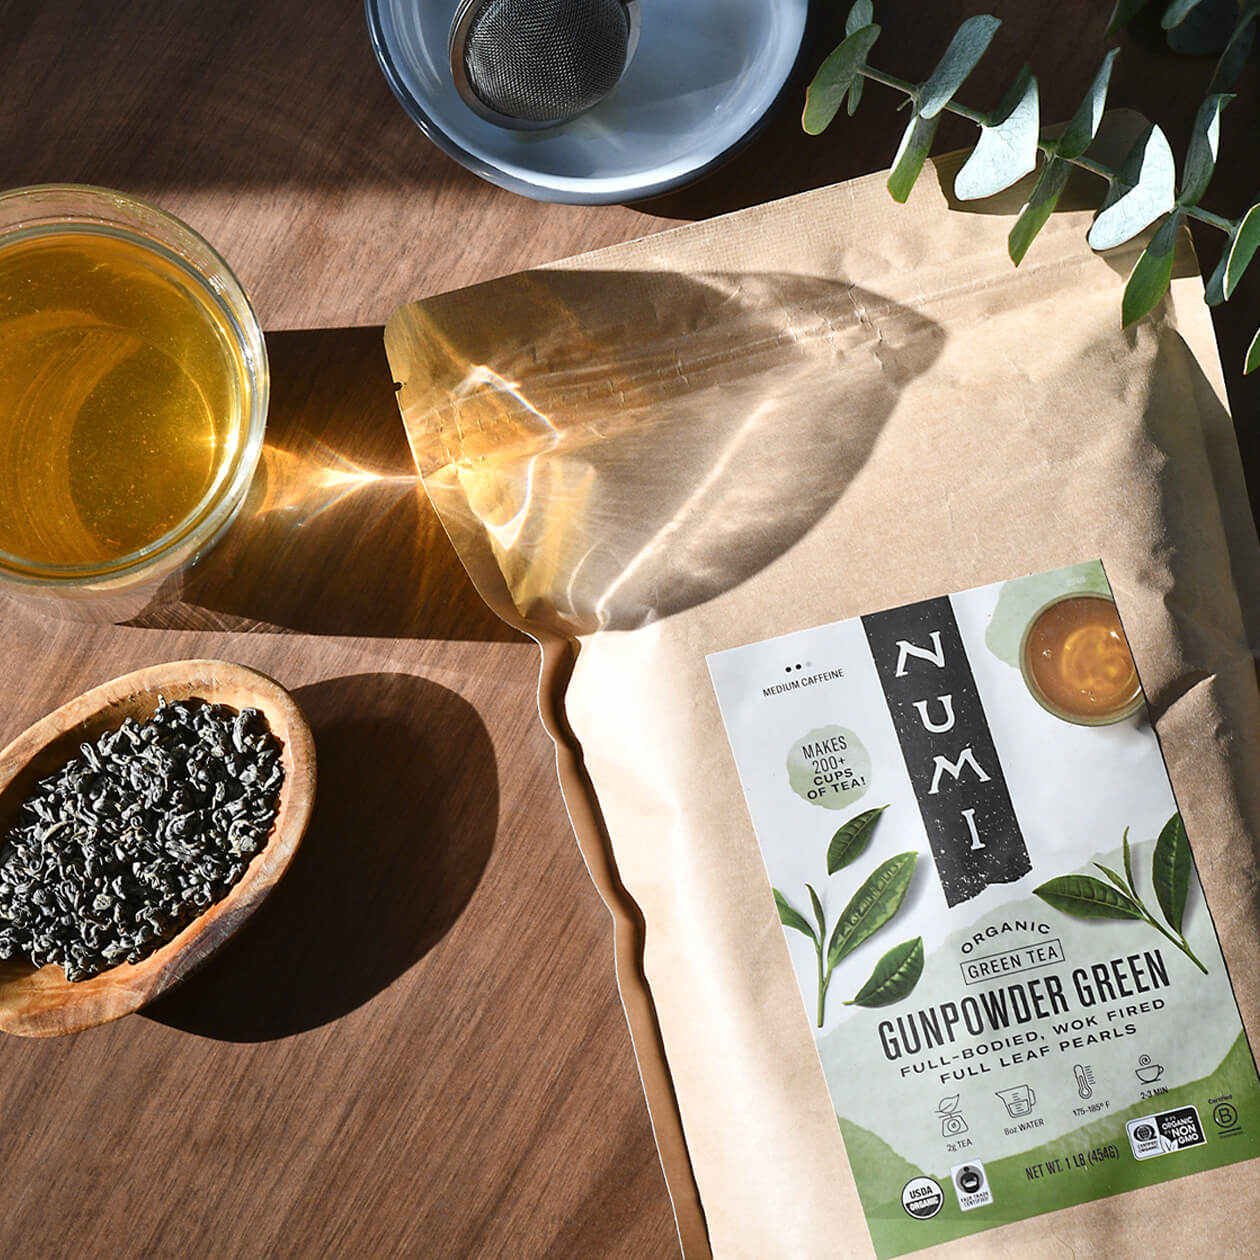 A bag of Gunpowder Green loose leaf tea sits on a wood table in the sunlight next to a brewed cup of loose leaf tea